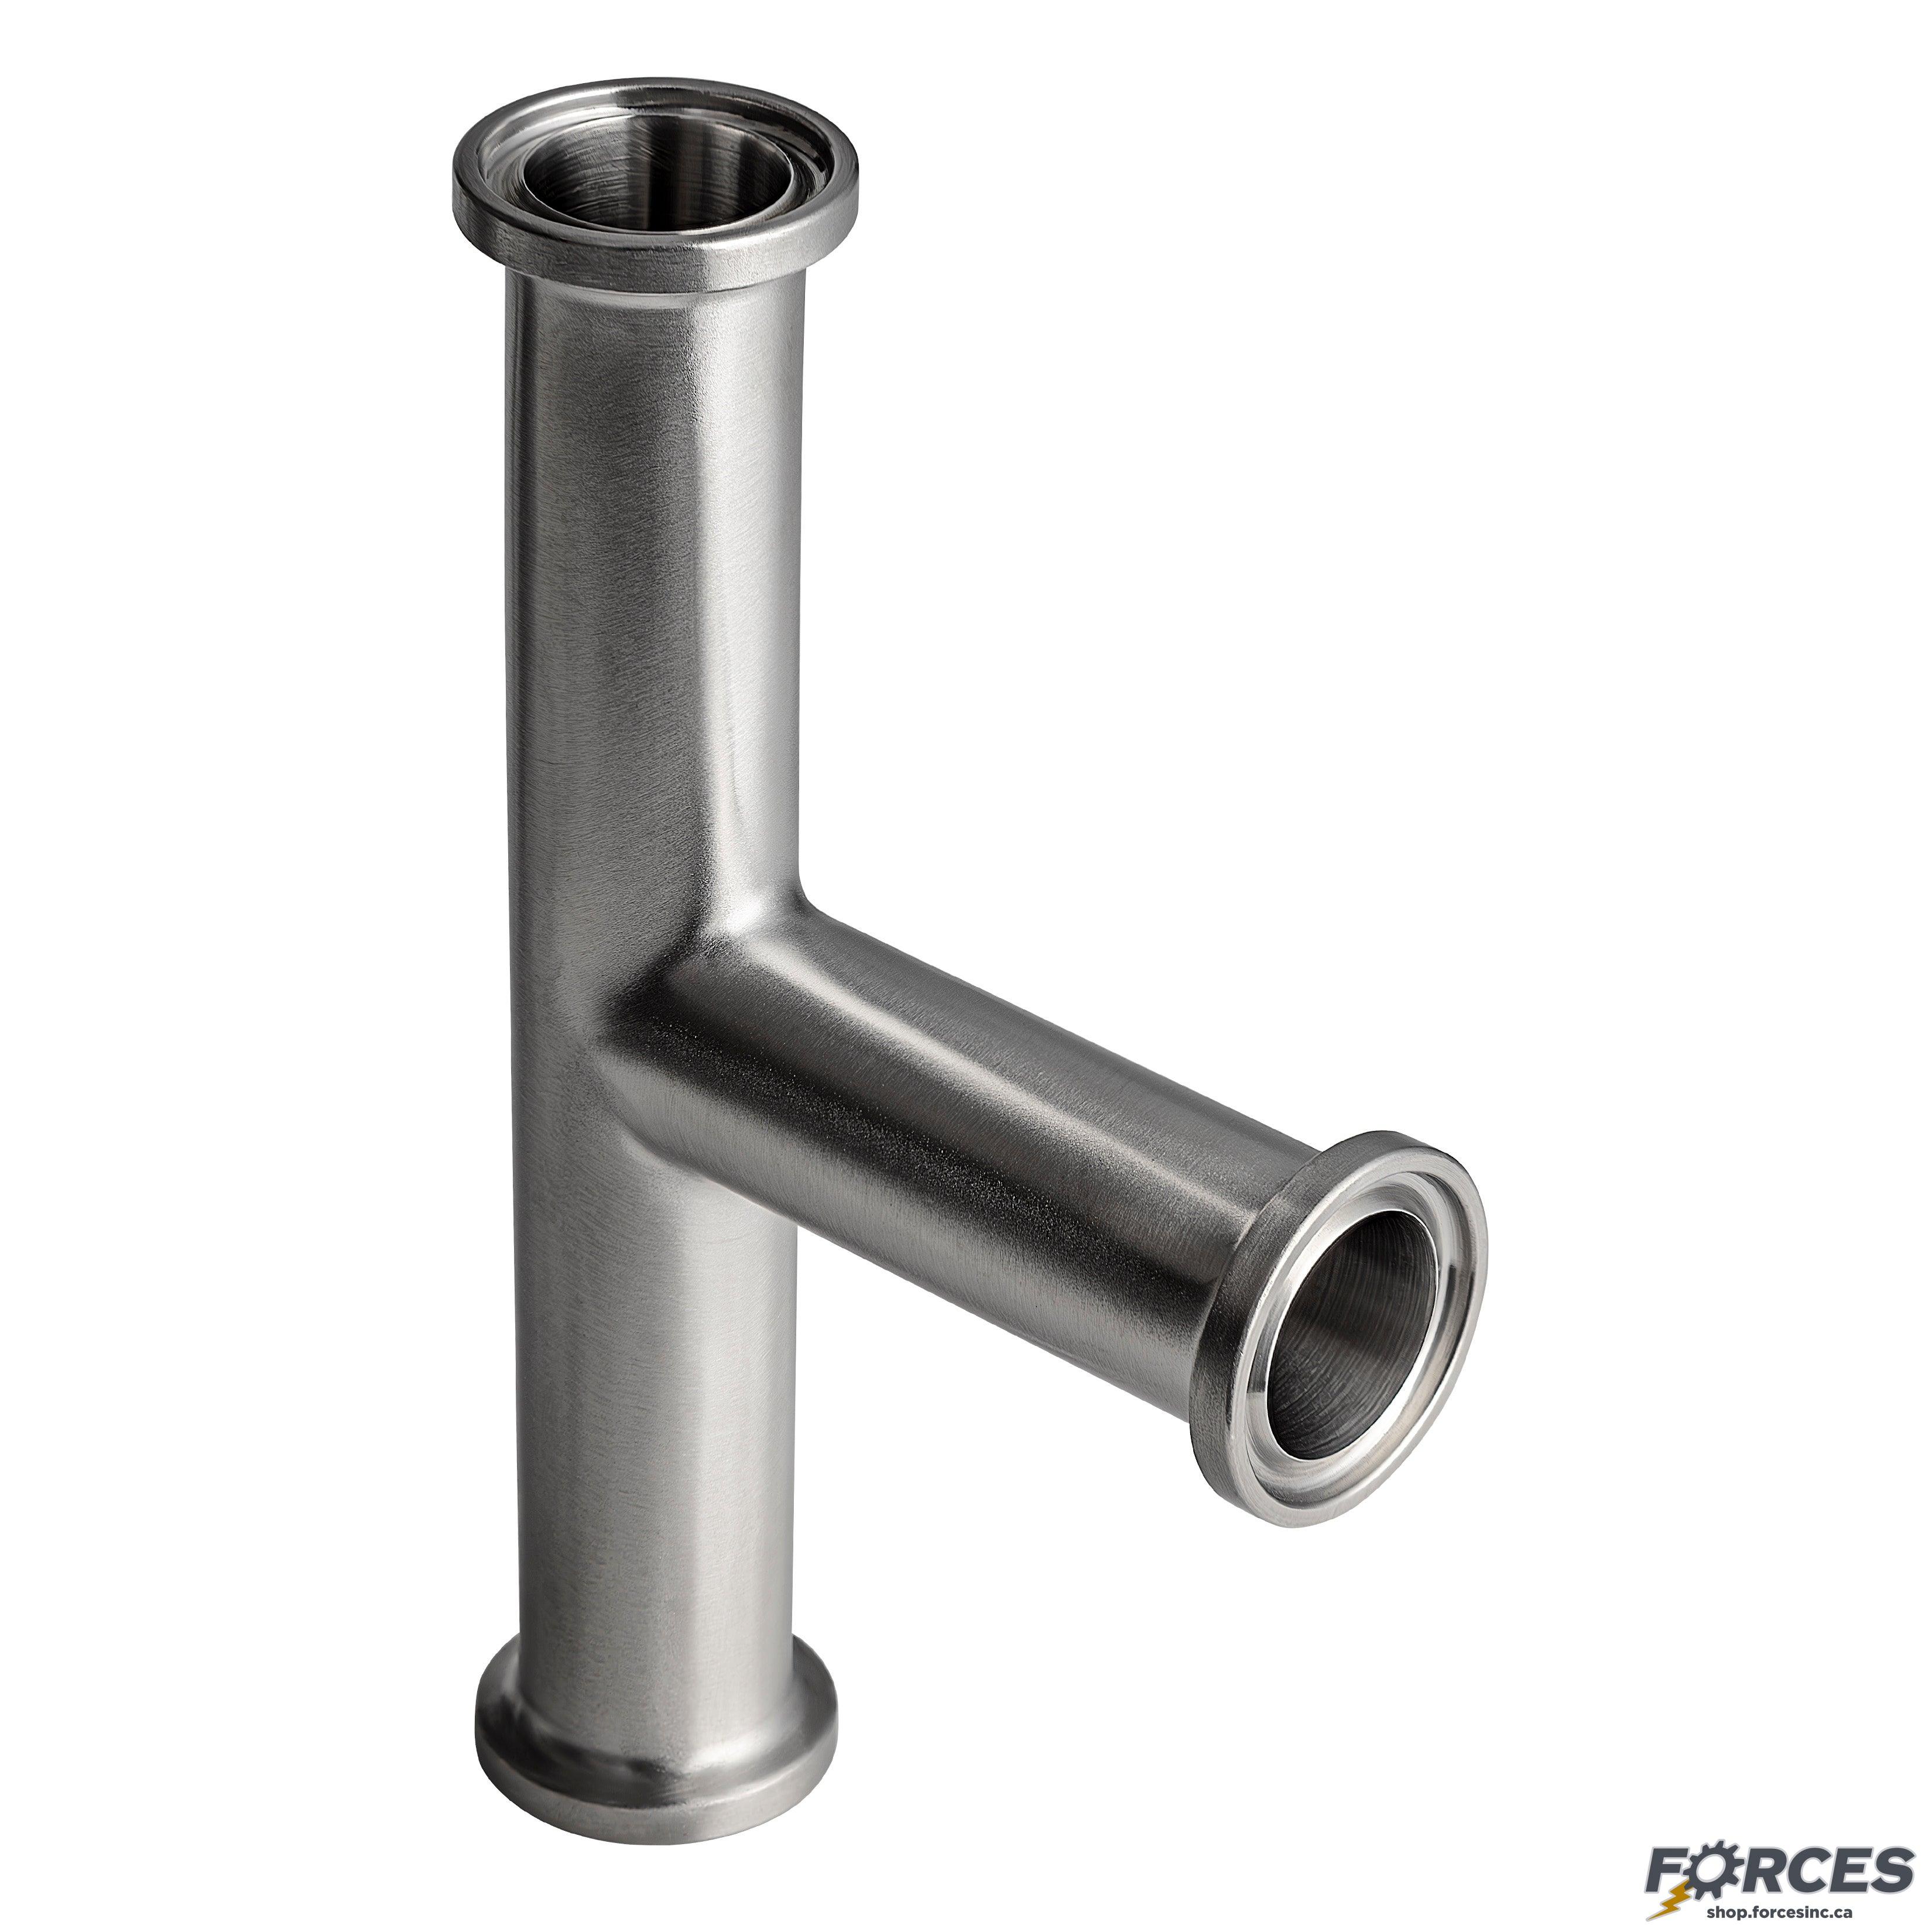 1-1/2" Tri-Clamp Tee - Stainless Steel 304 - Forces Inc